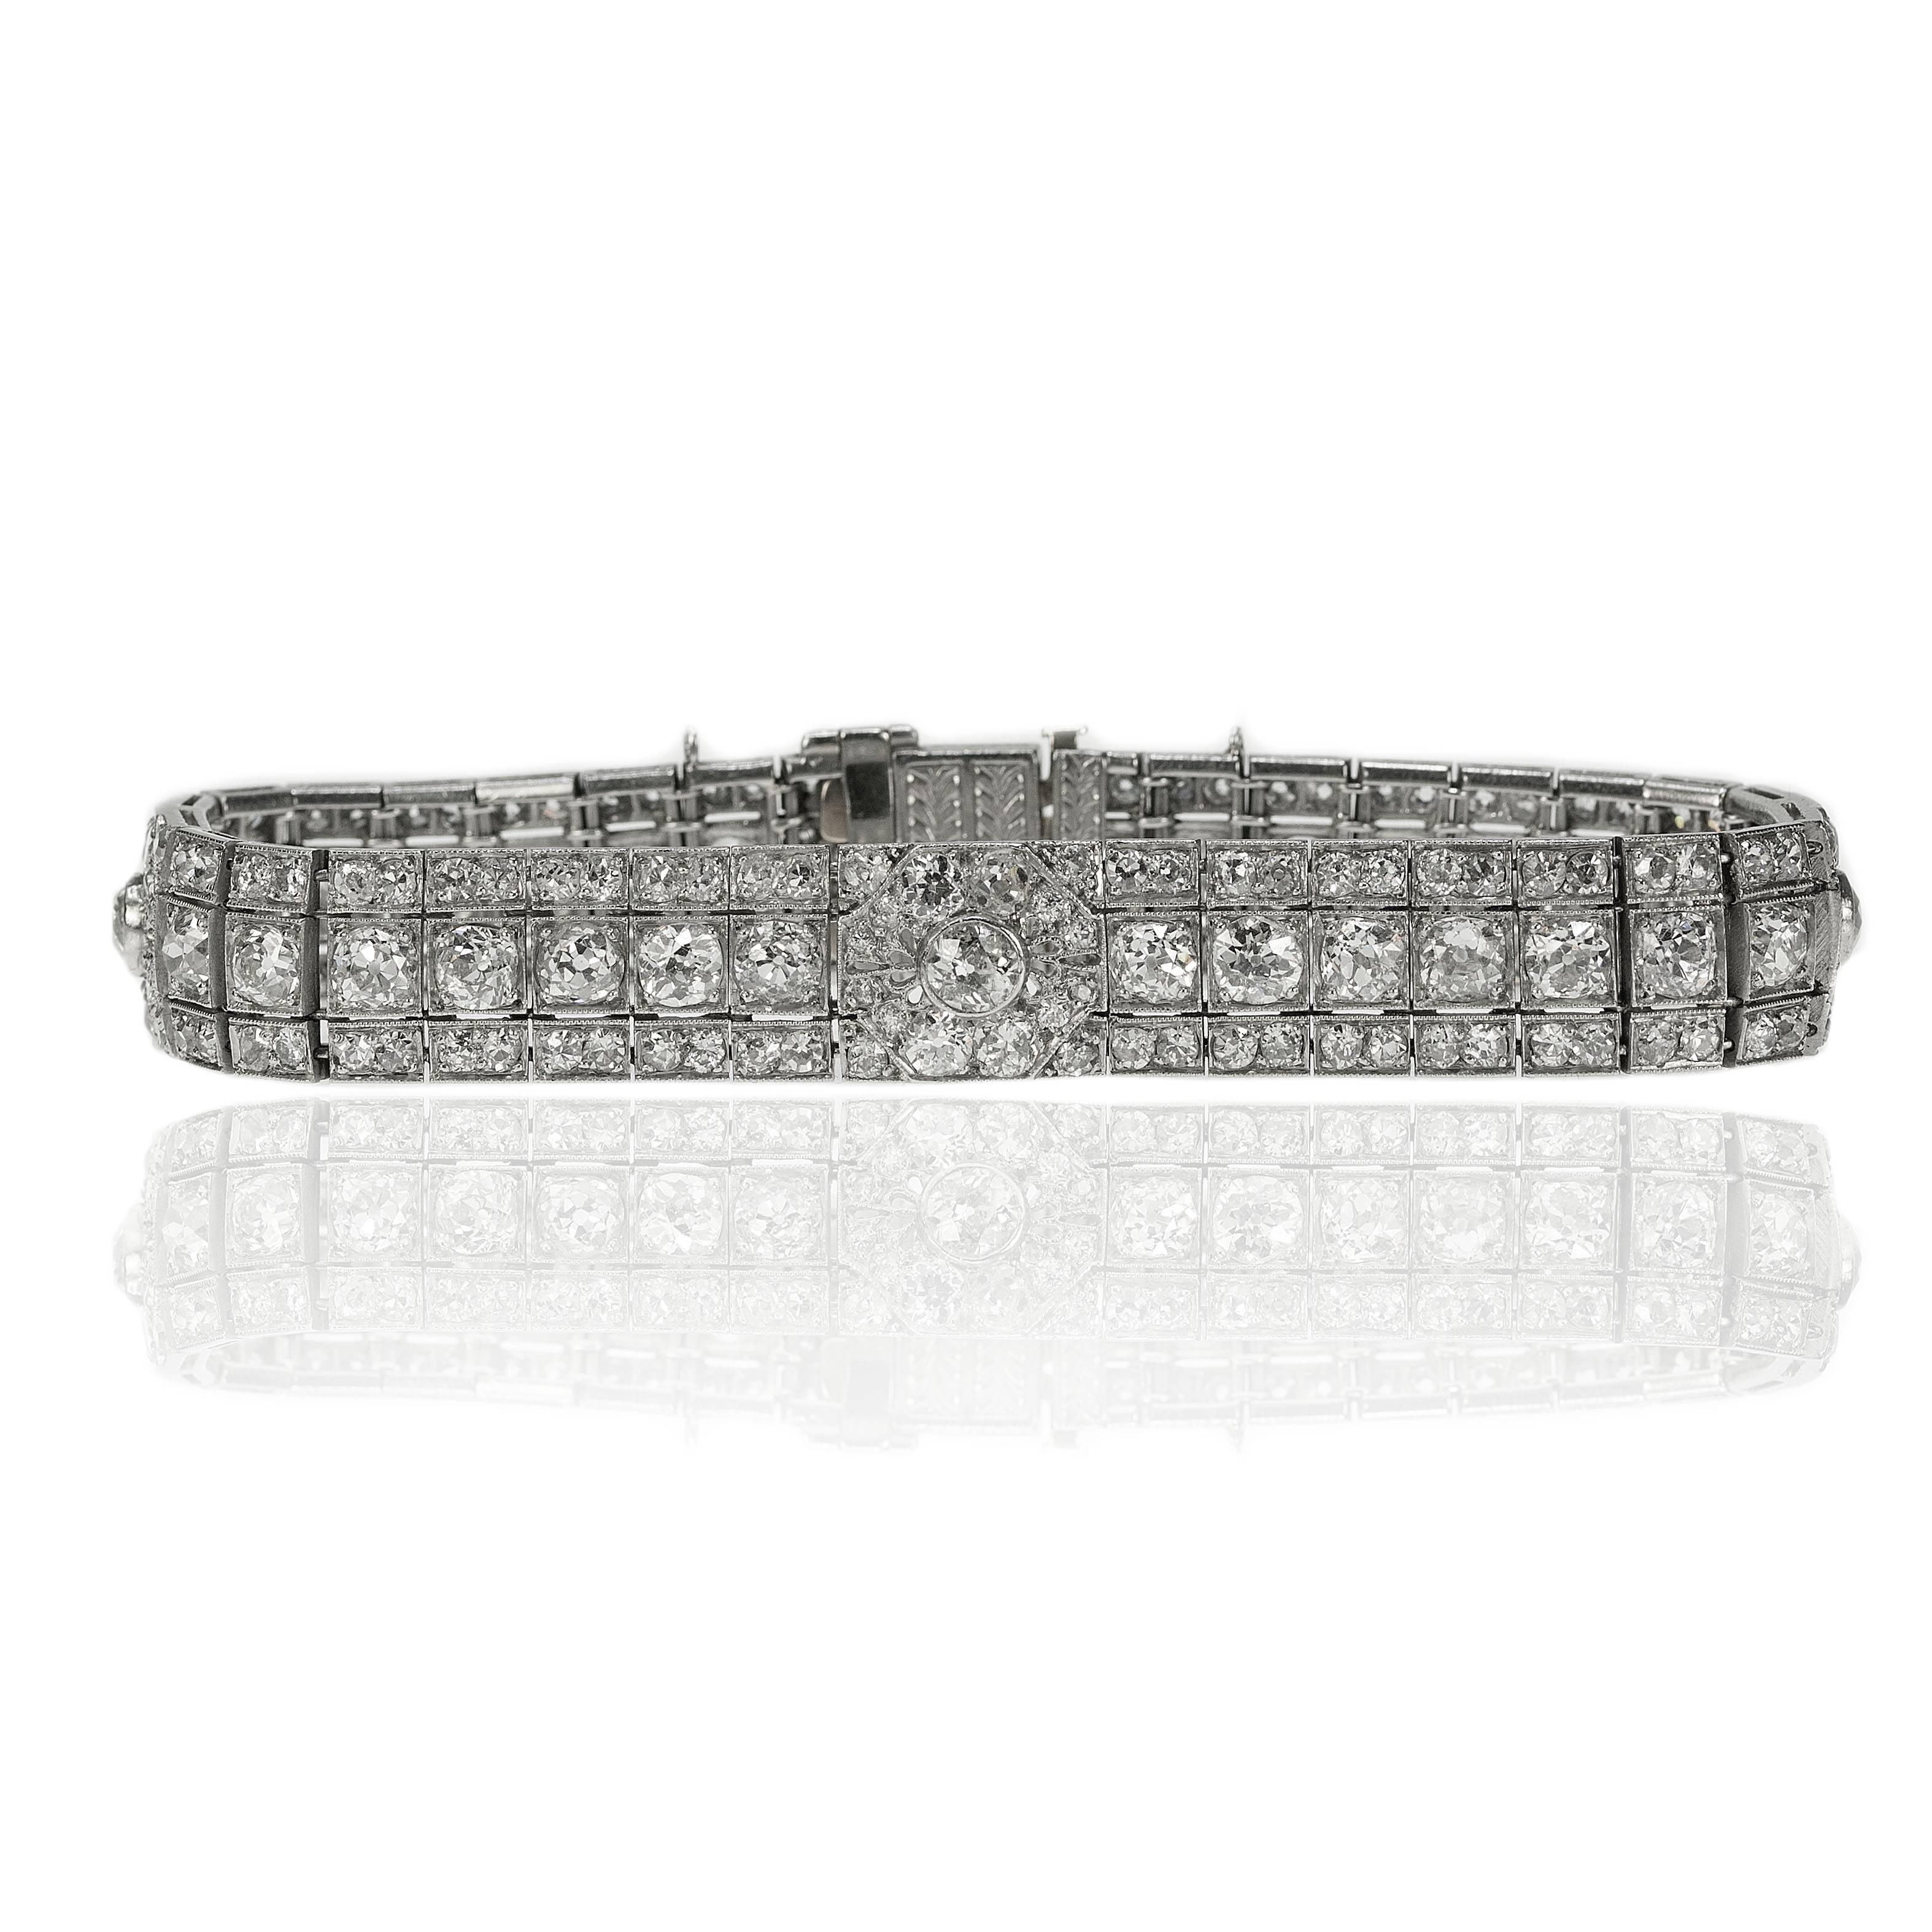 Pristine Art Deco Platinum Bracelet circa 1930's containing 208 old european cut diamonds weighing approximately 20.00 carats. Bracelet is 7.5" long and weighs 48.36 grams.